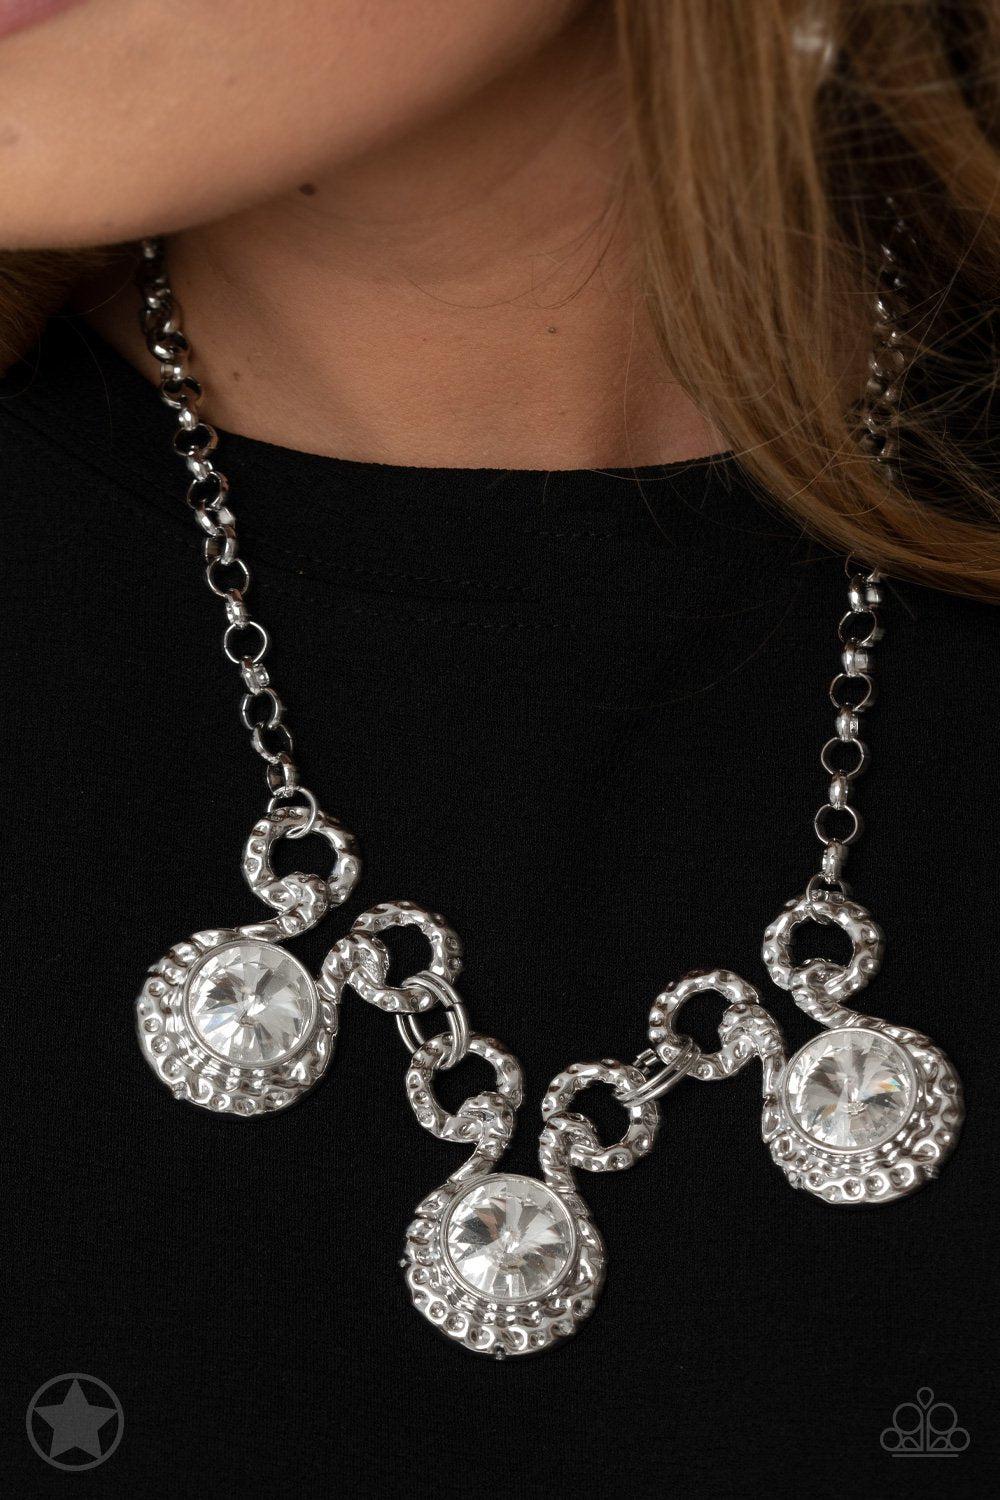 Hypnotized - Silver and White Rhinestone Necklace and matching Earrings - Paparazzi Accessories - model -CarasShop.com - $5 Jewelry by Cara Jewels